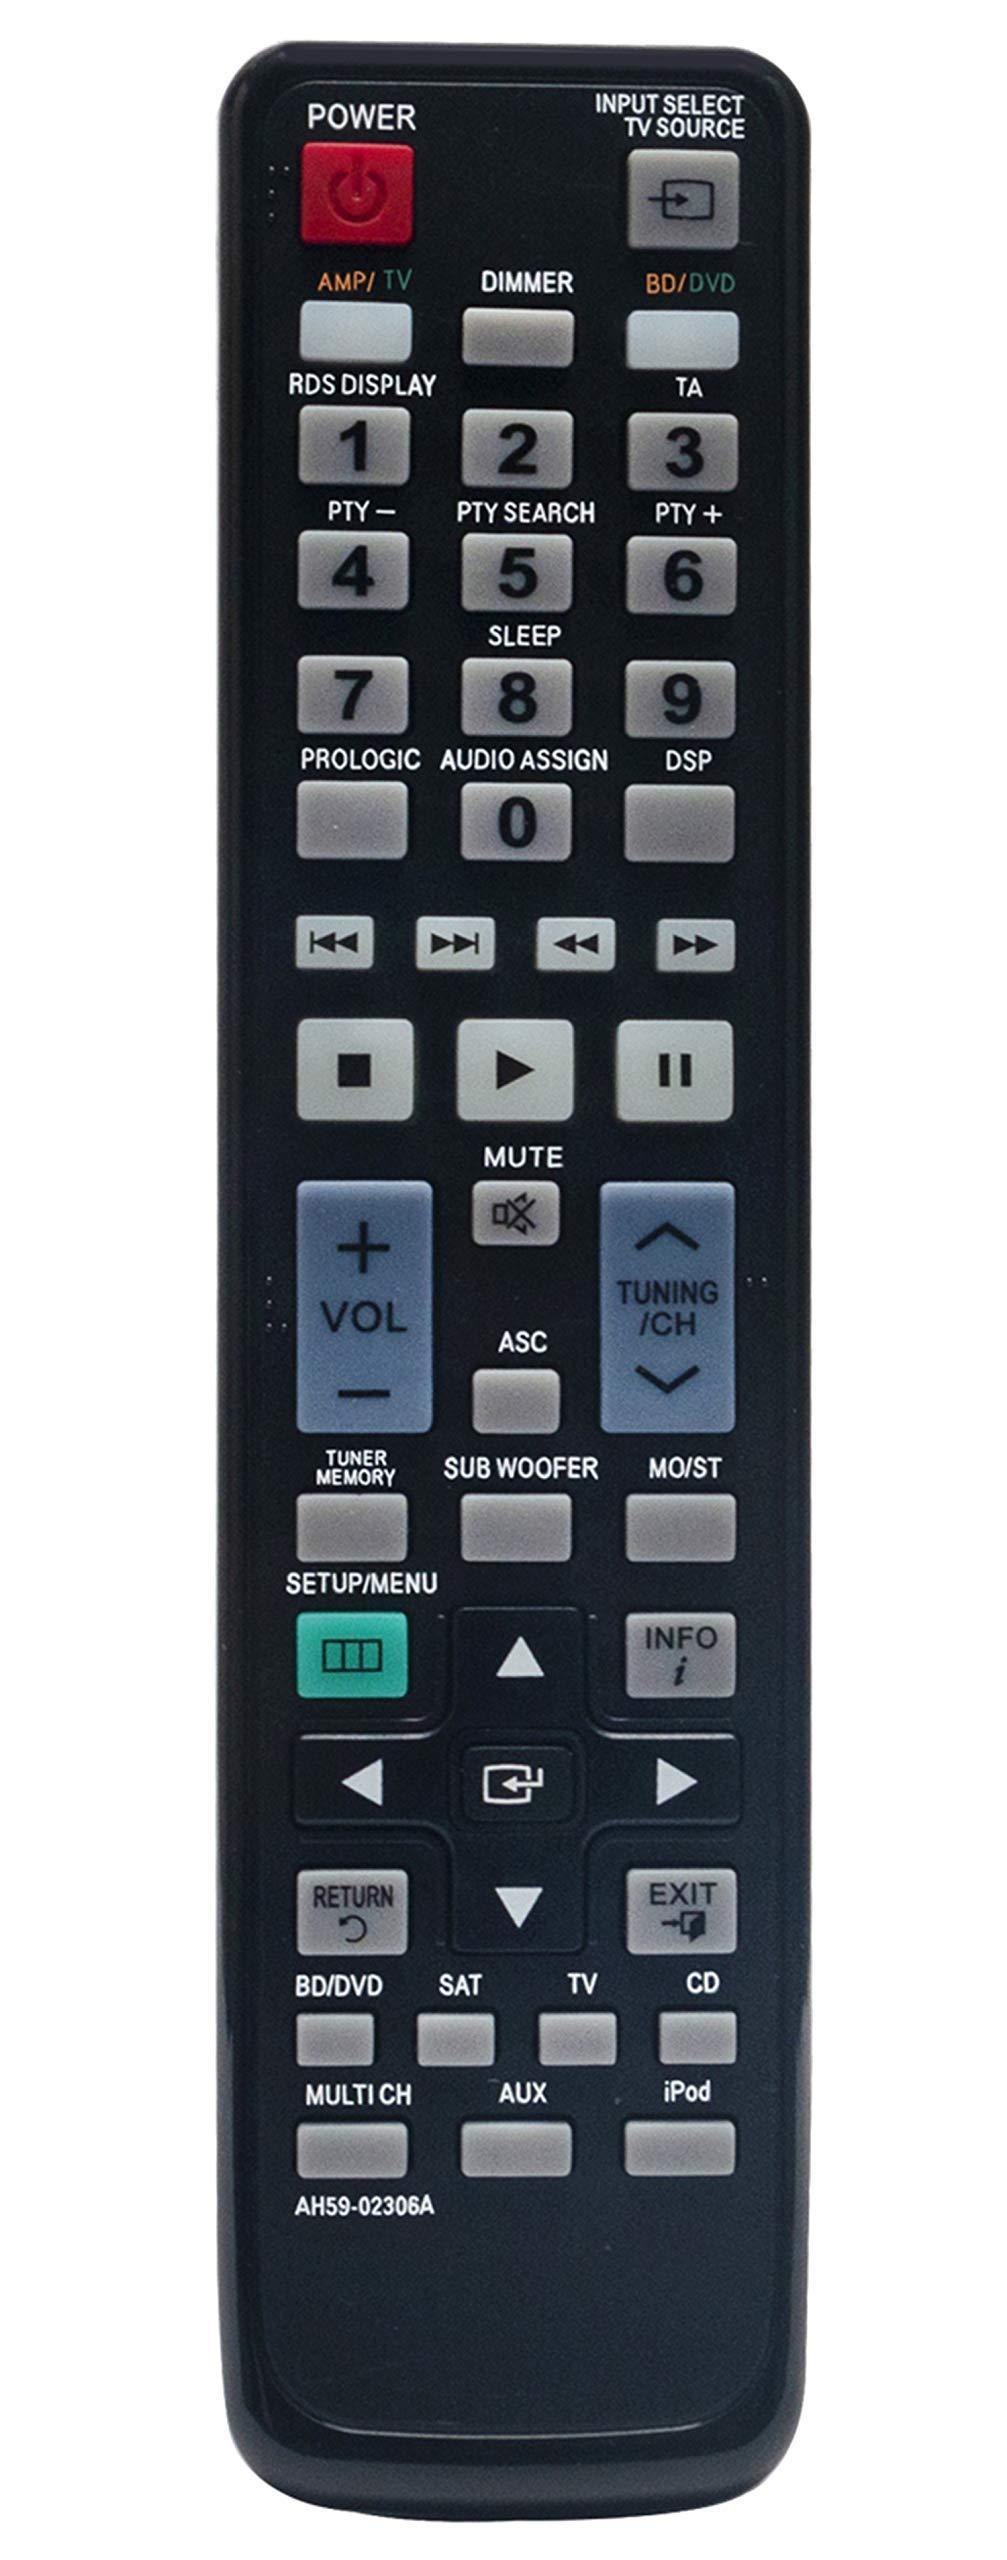 AH59-02306A Replaced Remote fit for Samsung AV Receiver HW-C560S HW-C500 HW-C560S/XAA Home Theater HW-C700 HW-C770BS HW-C770B C770BS-XAC HW-C779S HW-C770S TM1051 - LeoForward Australia